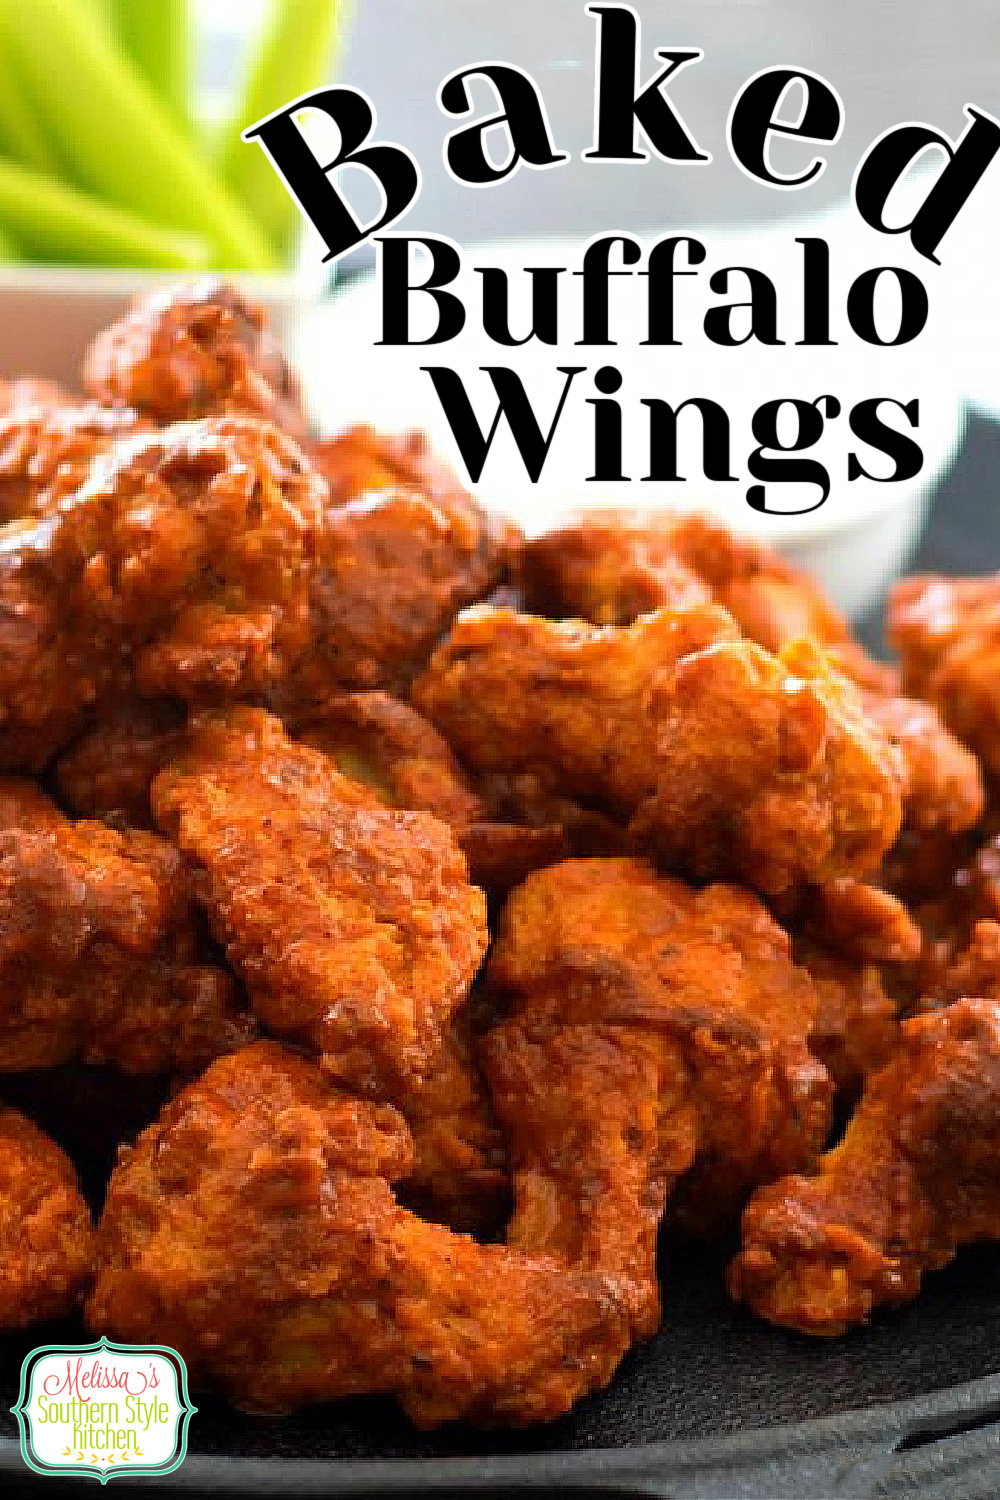 Skip the oil and make this crispy Baked Buffalo Wings Recipe in the oven in a snap #wings #buffalowings #chickenwings #bakedbuffalowings #chicken #chickenrecipes #easywings #easyrecipes #partyfood #appetizer #classicbuffalowingsrecipe #southernrecipes #bestbuffalowingsrecipe #southernfood #melissassouthernstylekitchen via @melissasssk